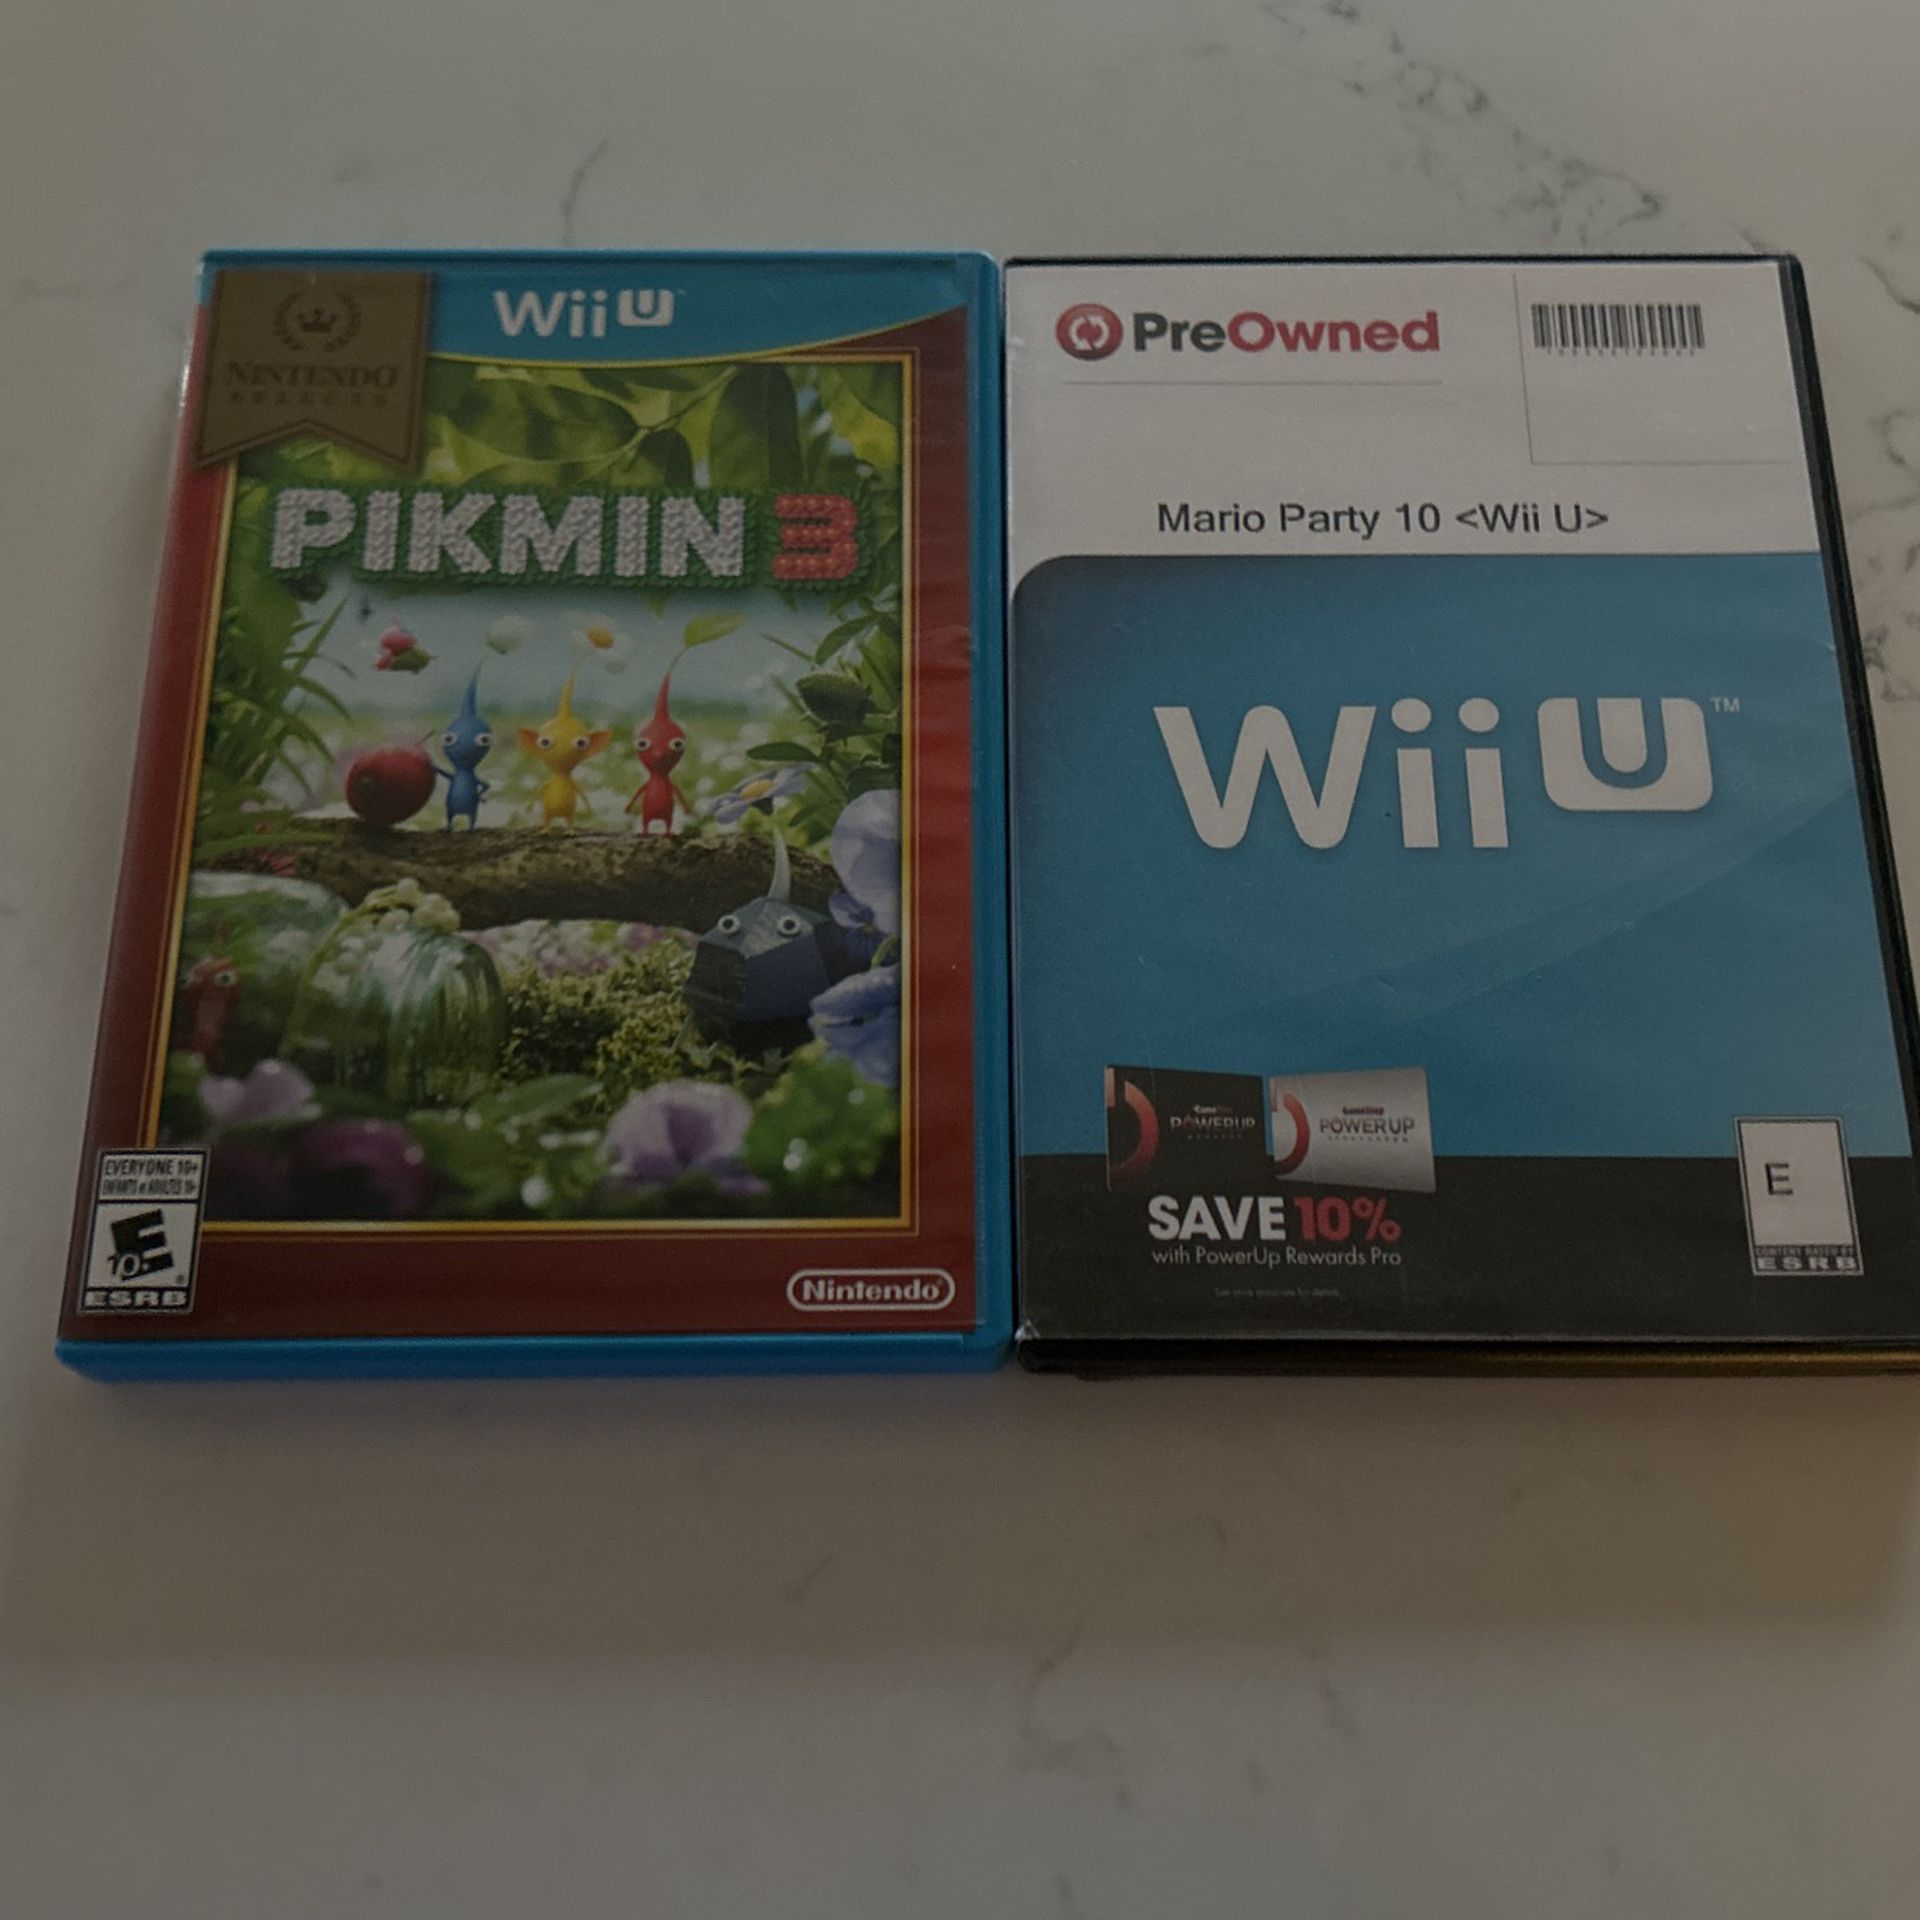 Wiki Pikmin 3 and Wii U Mario Party 10